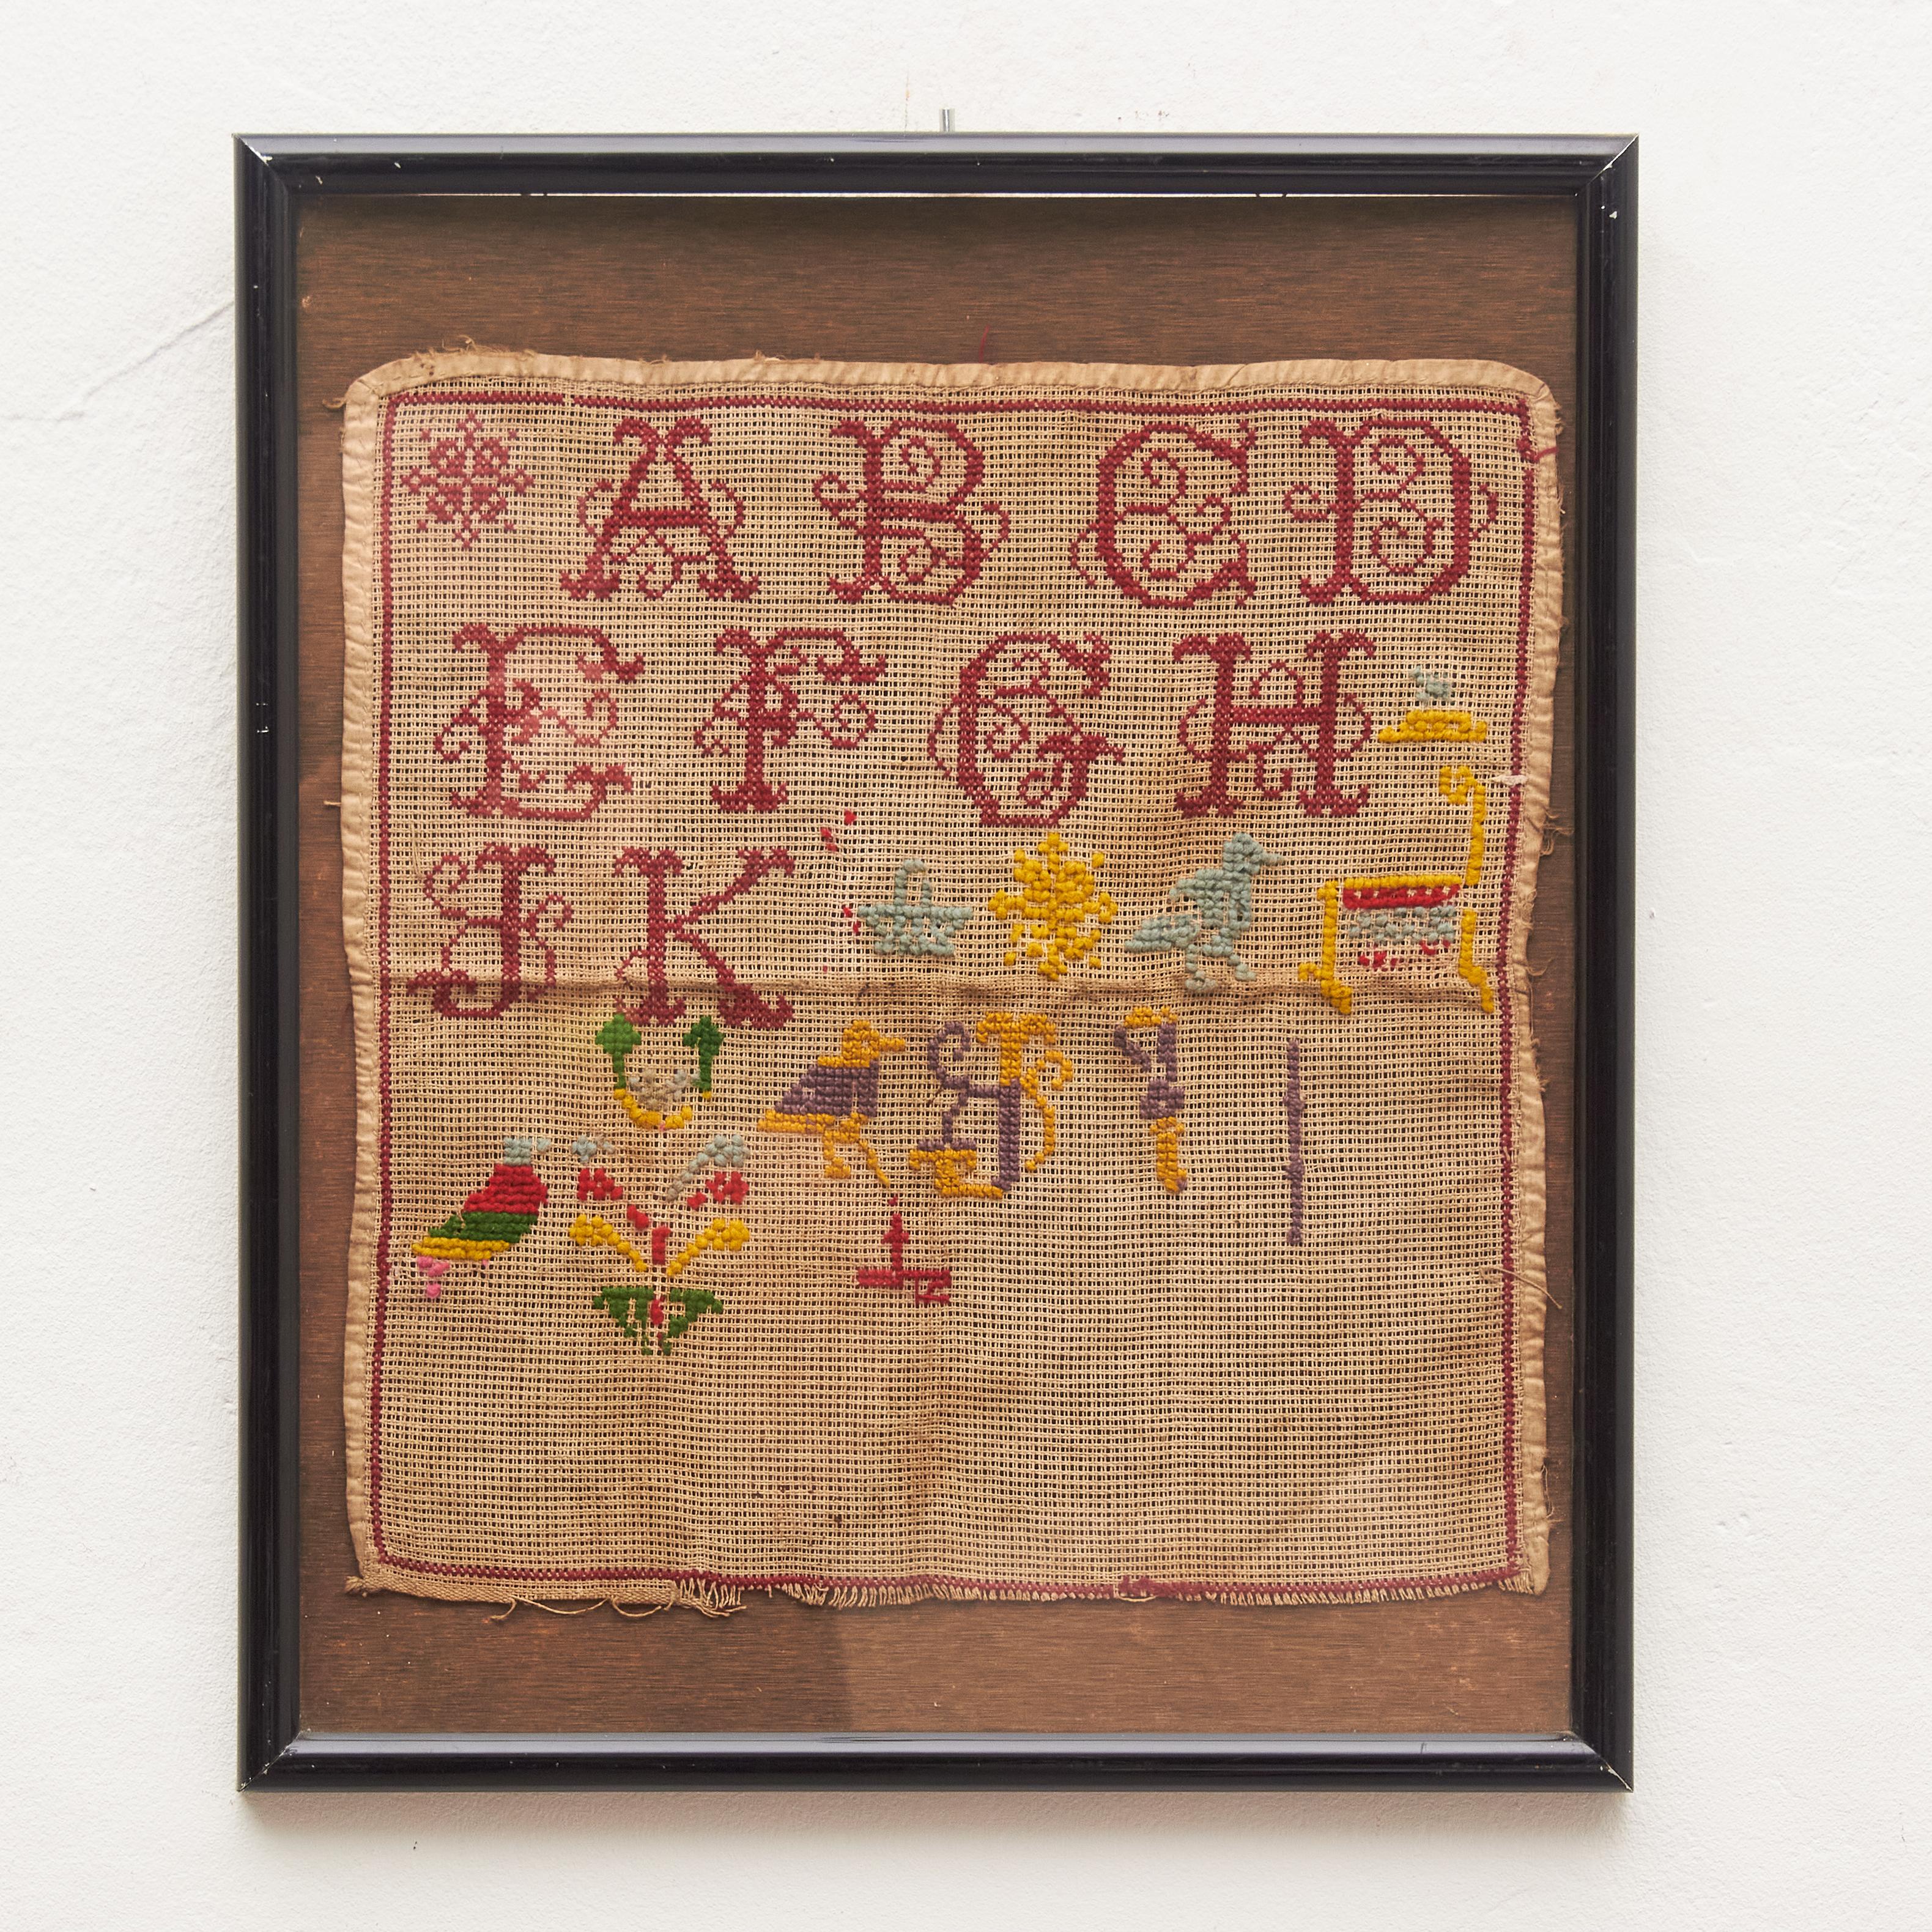 Immerse yourself in the enchanting beauty of our vintage cross-stitch sampler from the early 20th century. This singular piece boasts a classic red-on-white design with meticulously crafted alphabet letters, numbers, ornate borders, and a delightful